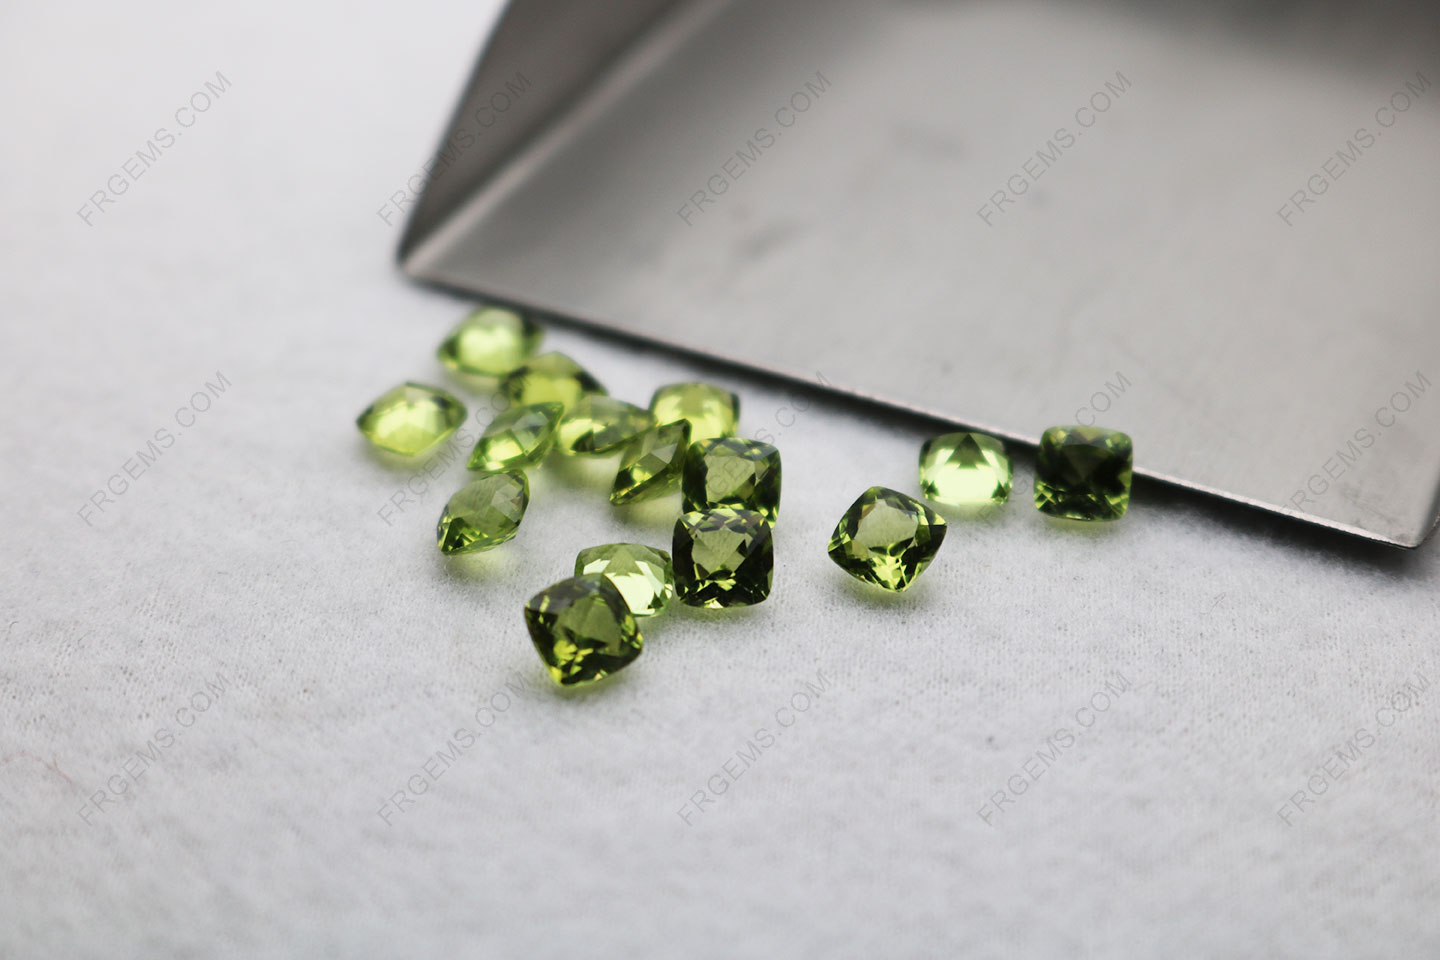 Natural genuine Peridot Color Cushion faceted 5x5mm Gemstones wholesale from China Supplier